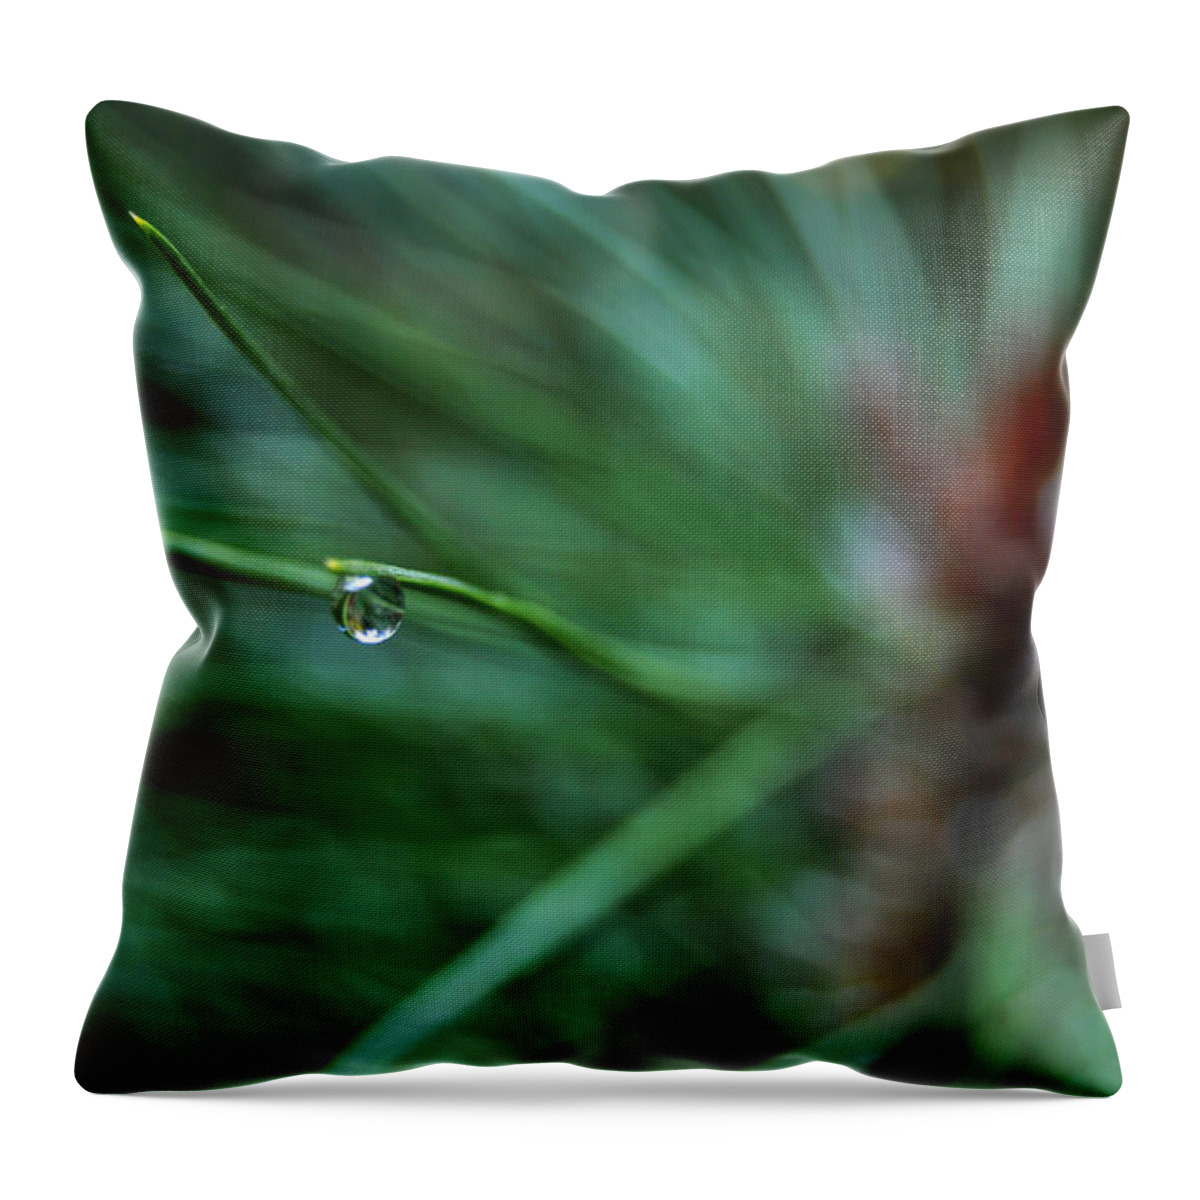 Raindrops Throw Pillow featuring the photograph Raindrop by Pelo Blanco Photo